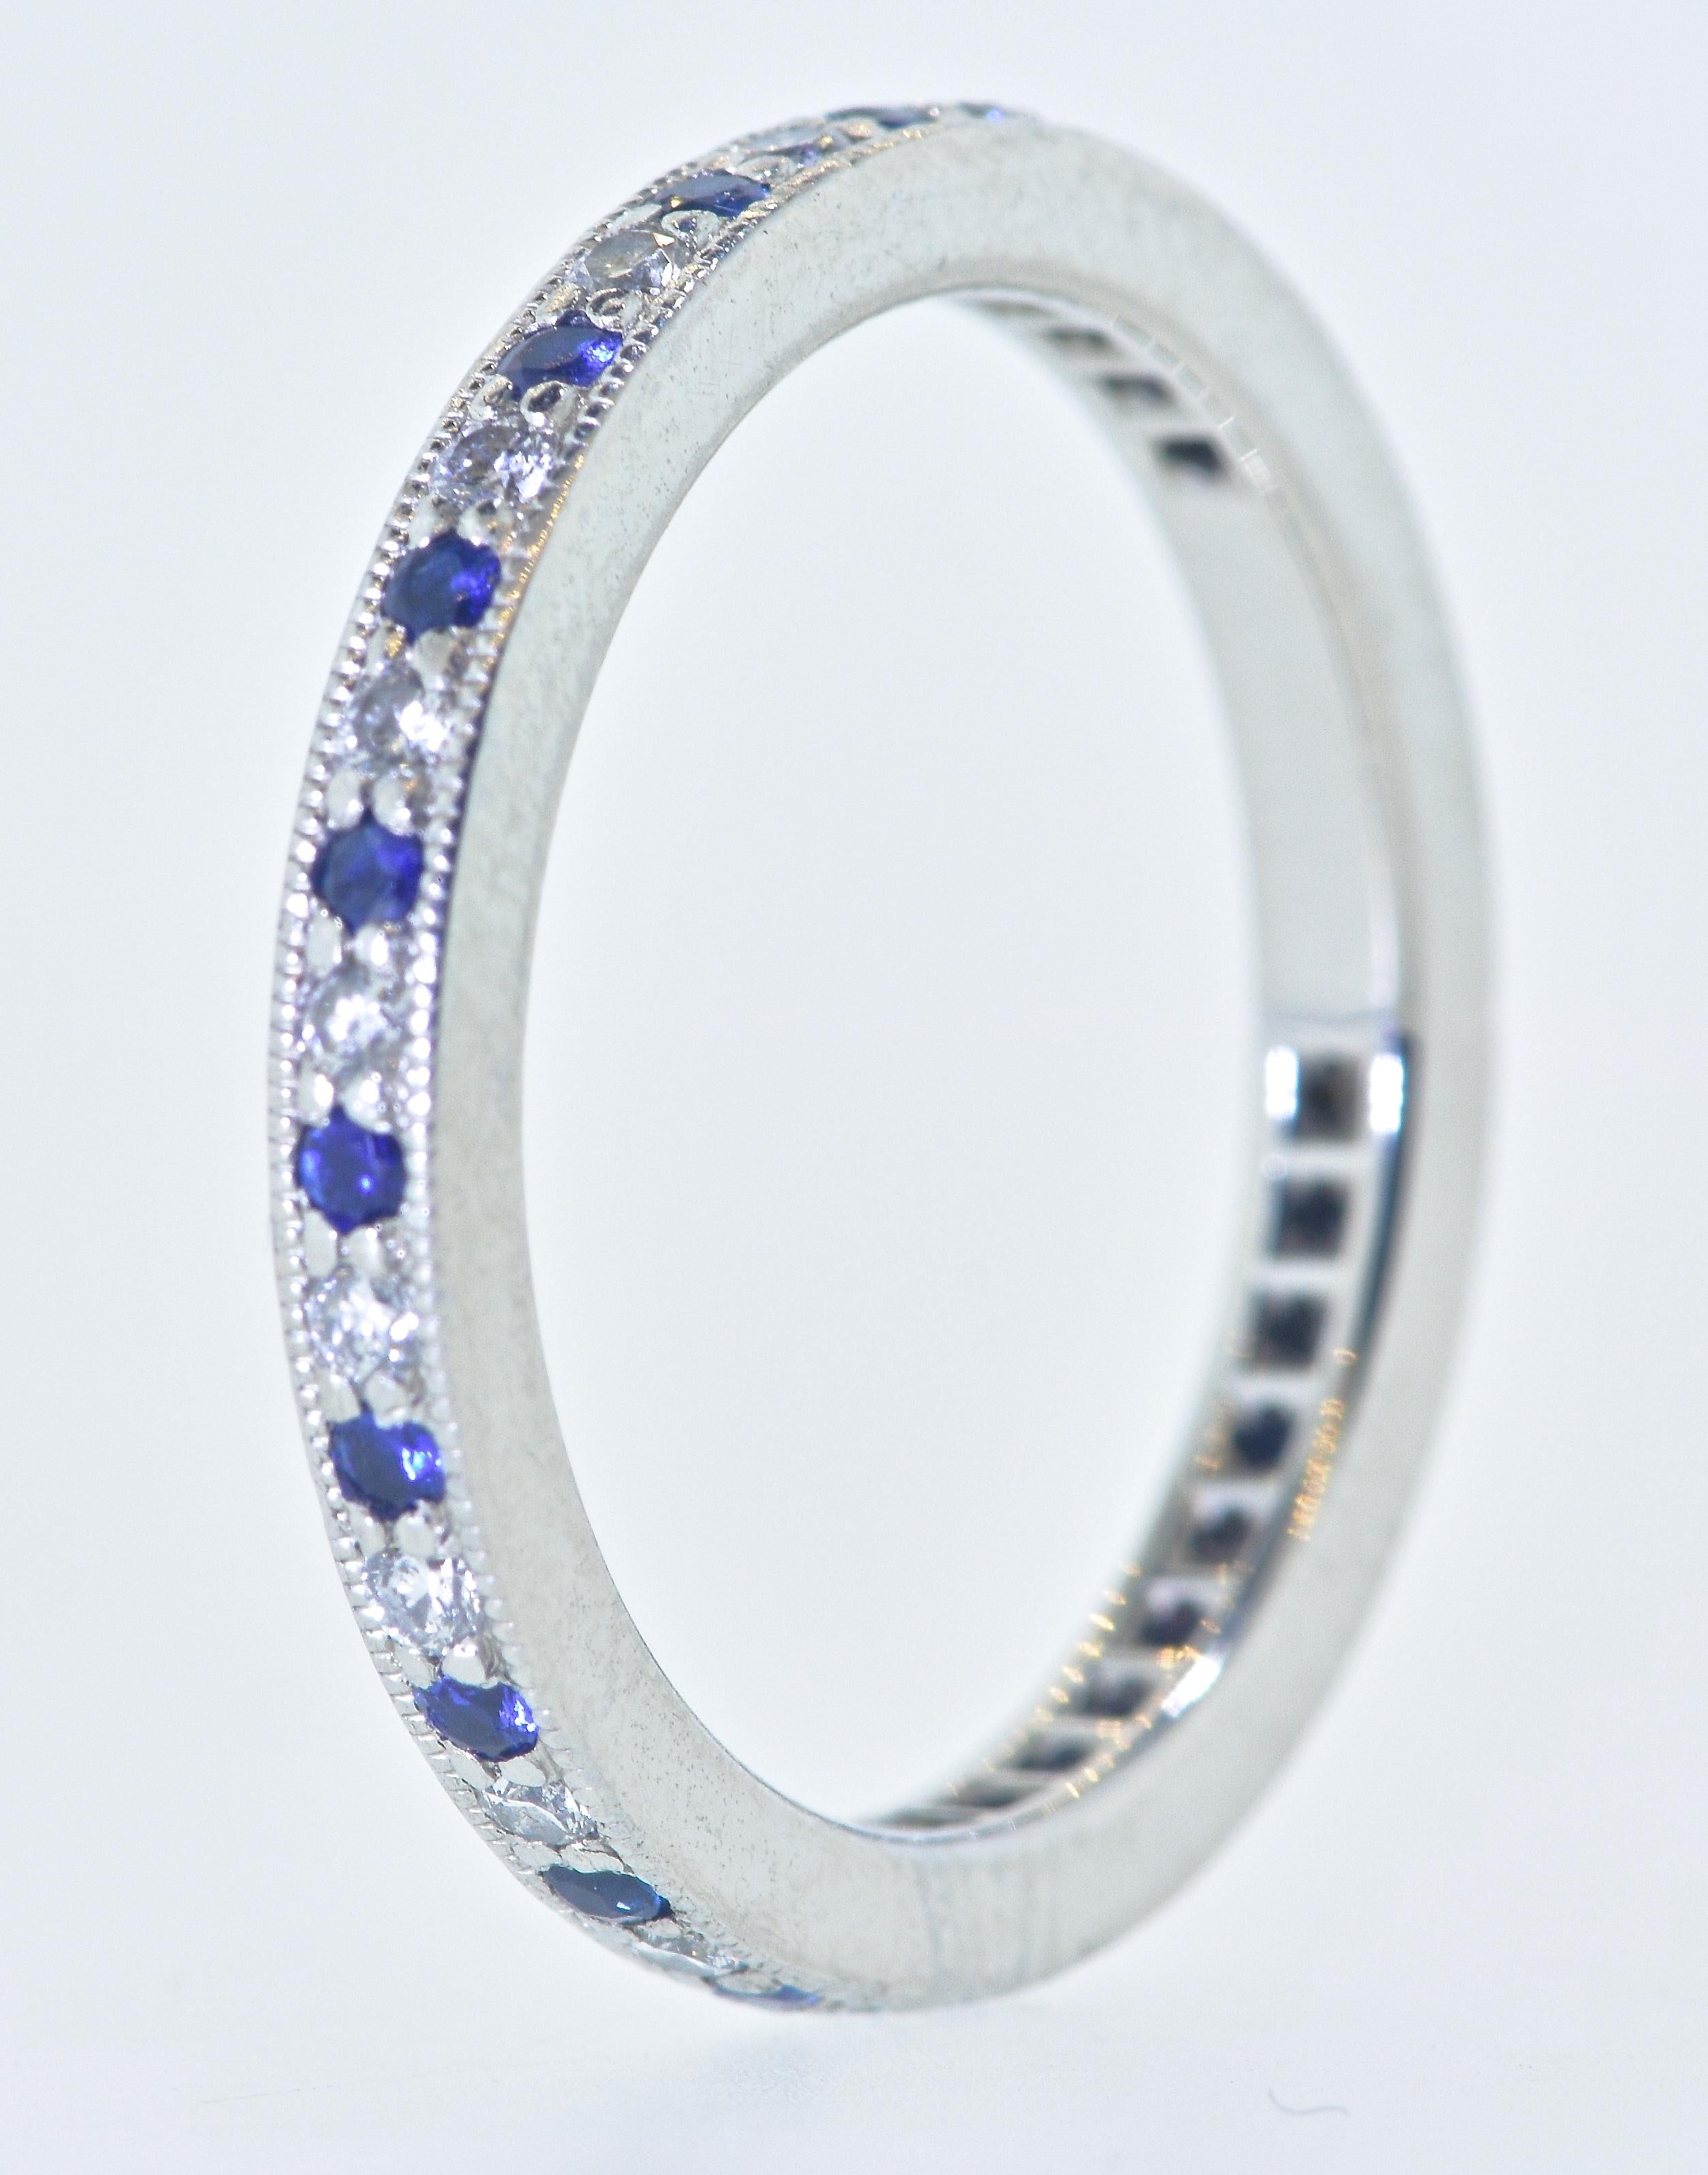 Tiffany & Co. diamond and sapphire platinum band. This eternity band from Tiffany's Legacy Collection is well made as one would expect from the world famous house of Tiffany & Co.  The diamonds and the sapphires are set in milgrained edges.  This